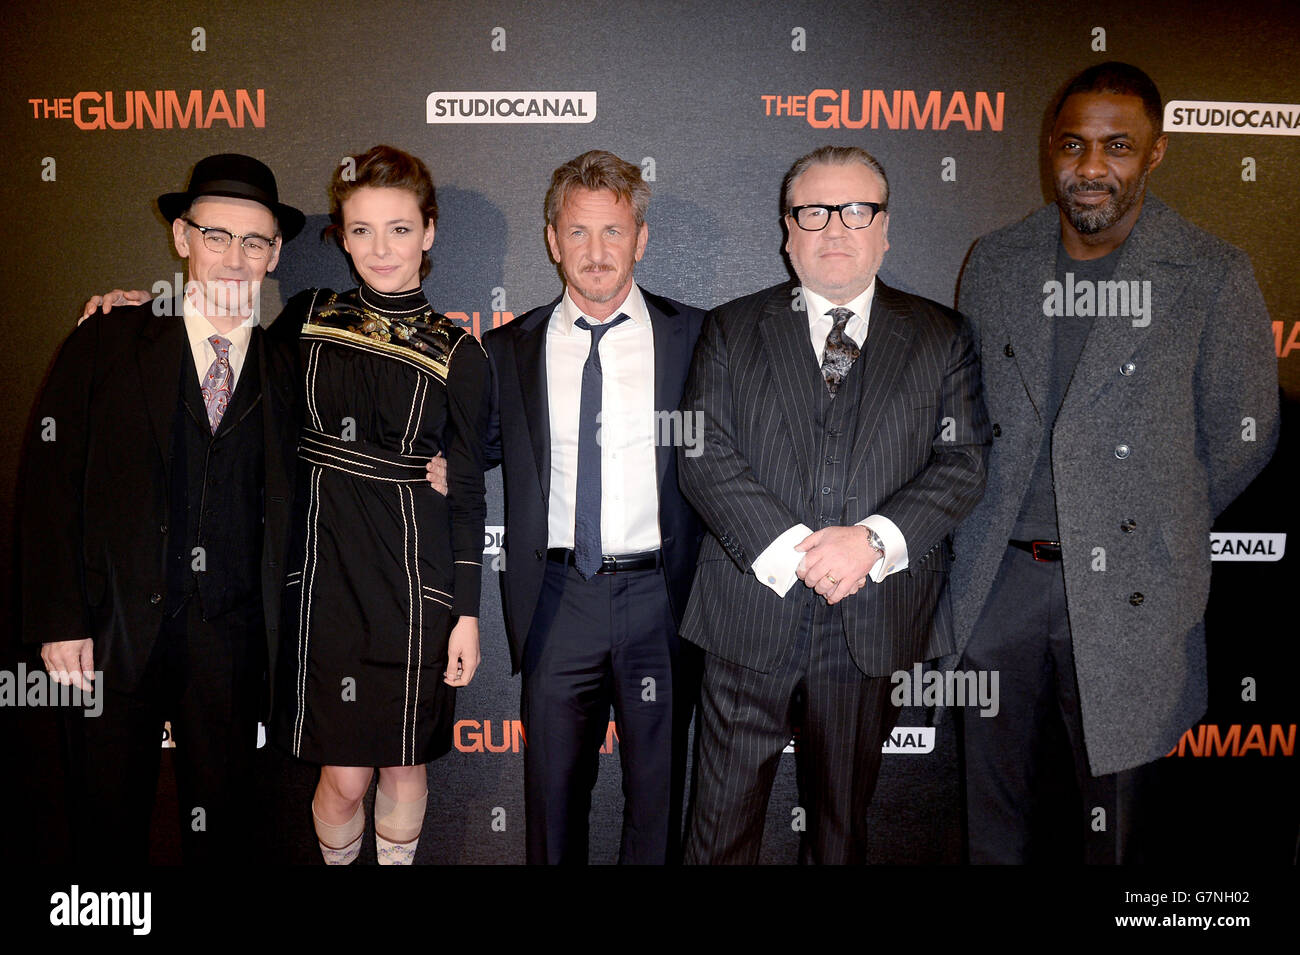 (left to right) Mark Rylance, Jasmine Trinca, Sean Penn, Ray Winstone and Idris Elba attend the World Premiere of The Gunman at the BFI South Bank, London. PRESS ASSOCIATION Photo. Picture date: Monday February 16, 2015.Photo credit should read: Anthony Devlin/PA Wire Stock Photo